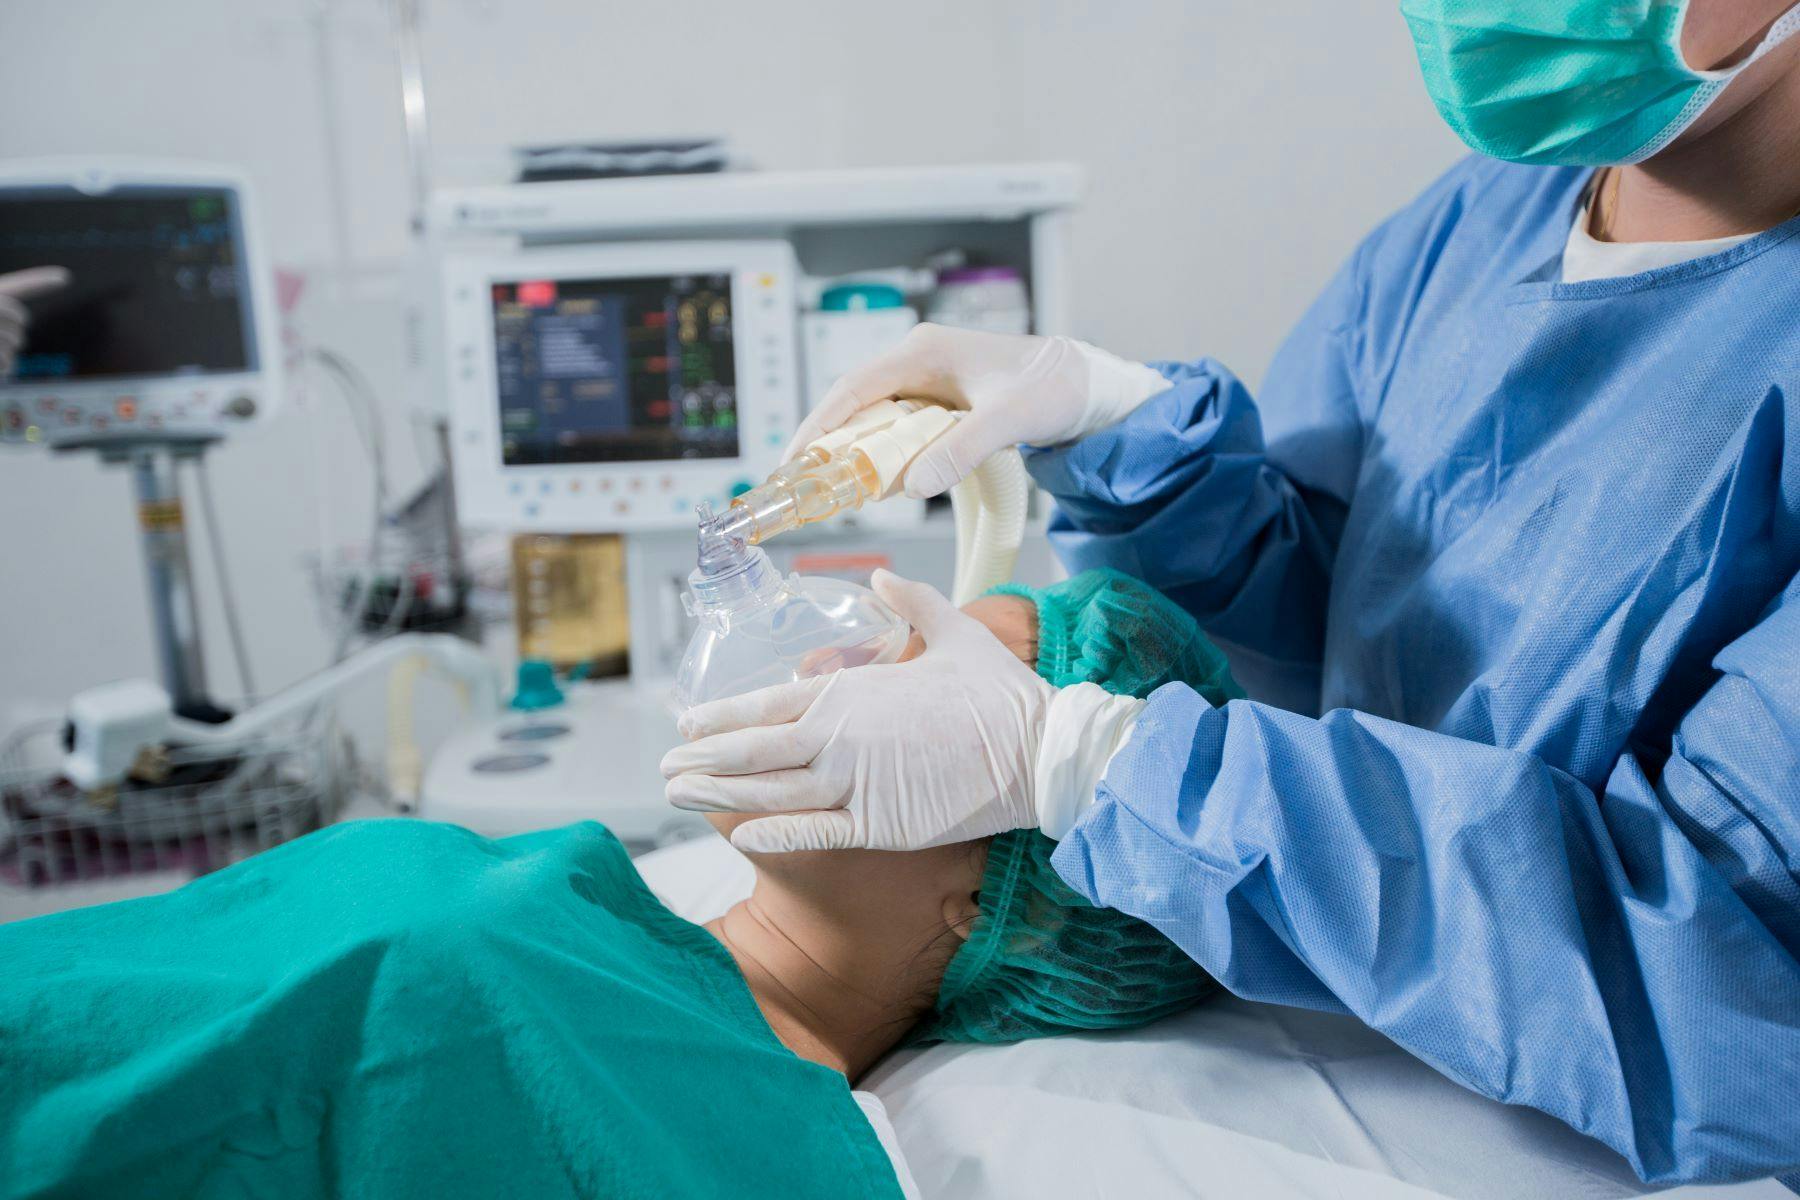 CRNA with patient in surgical procedure